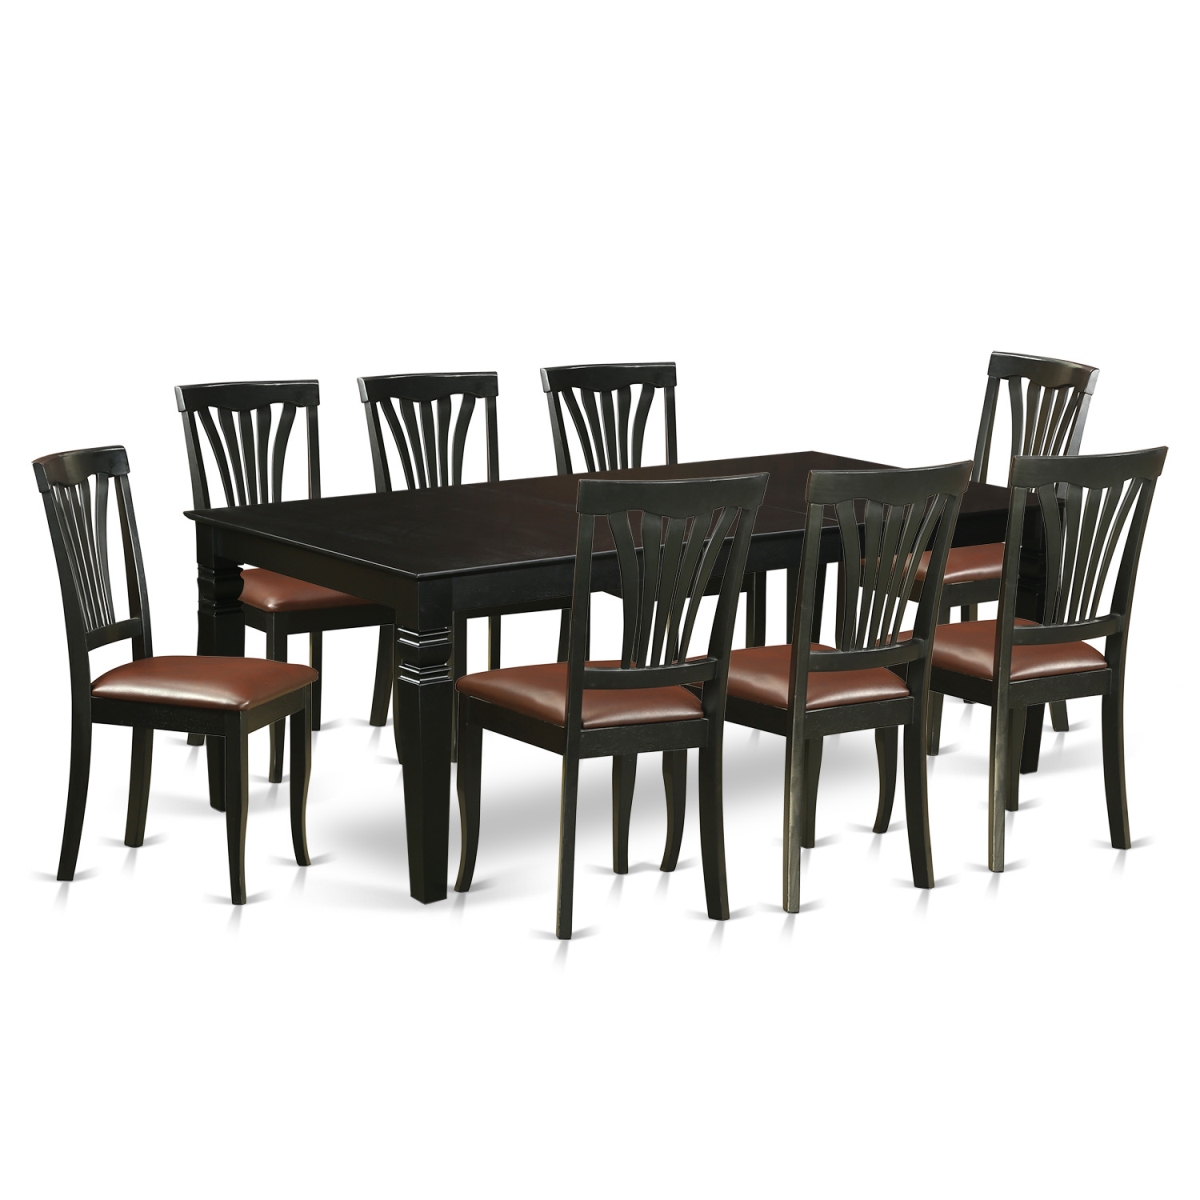 Lgav9-blk-lc Dinette Set With 1 Logan Kitchen Table & Eight Faux Leather Upholstery Chairs, Luxurious Black - 9 Piece